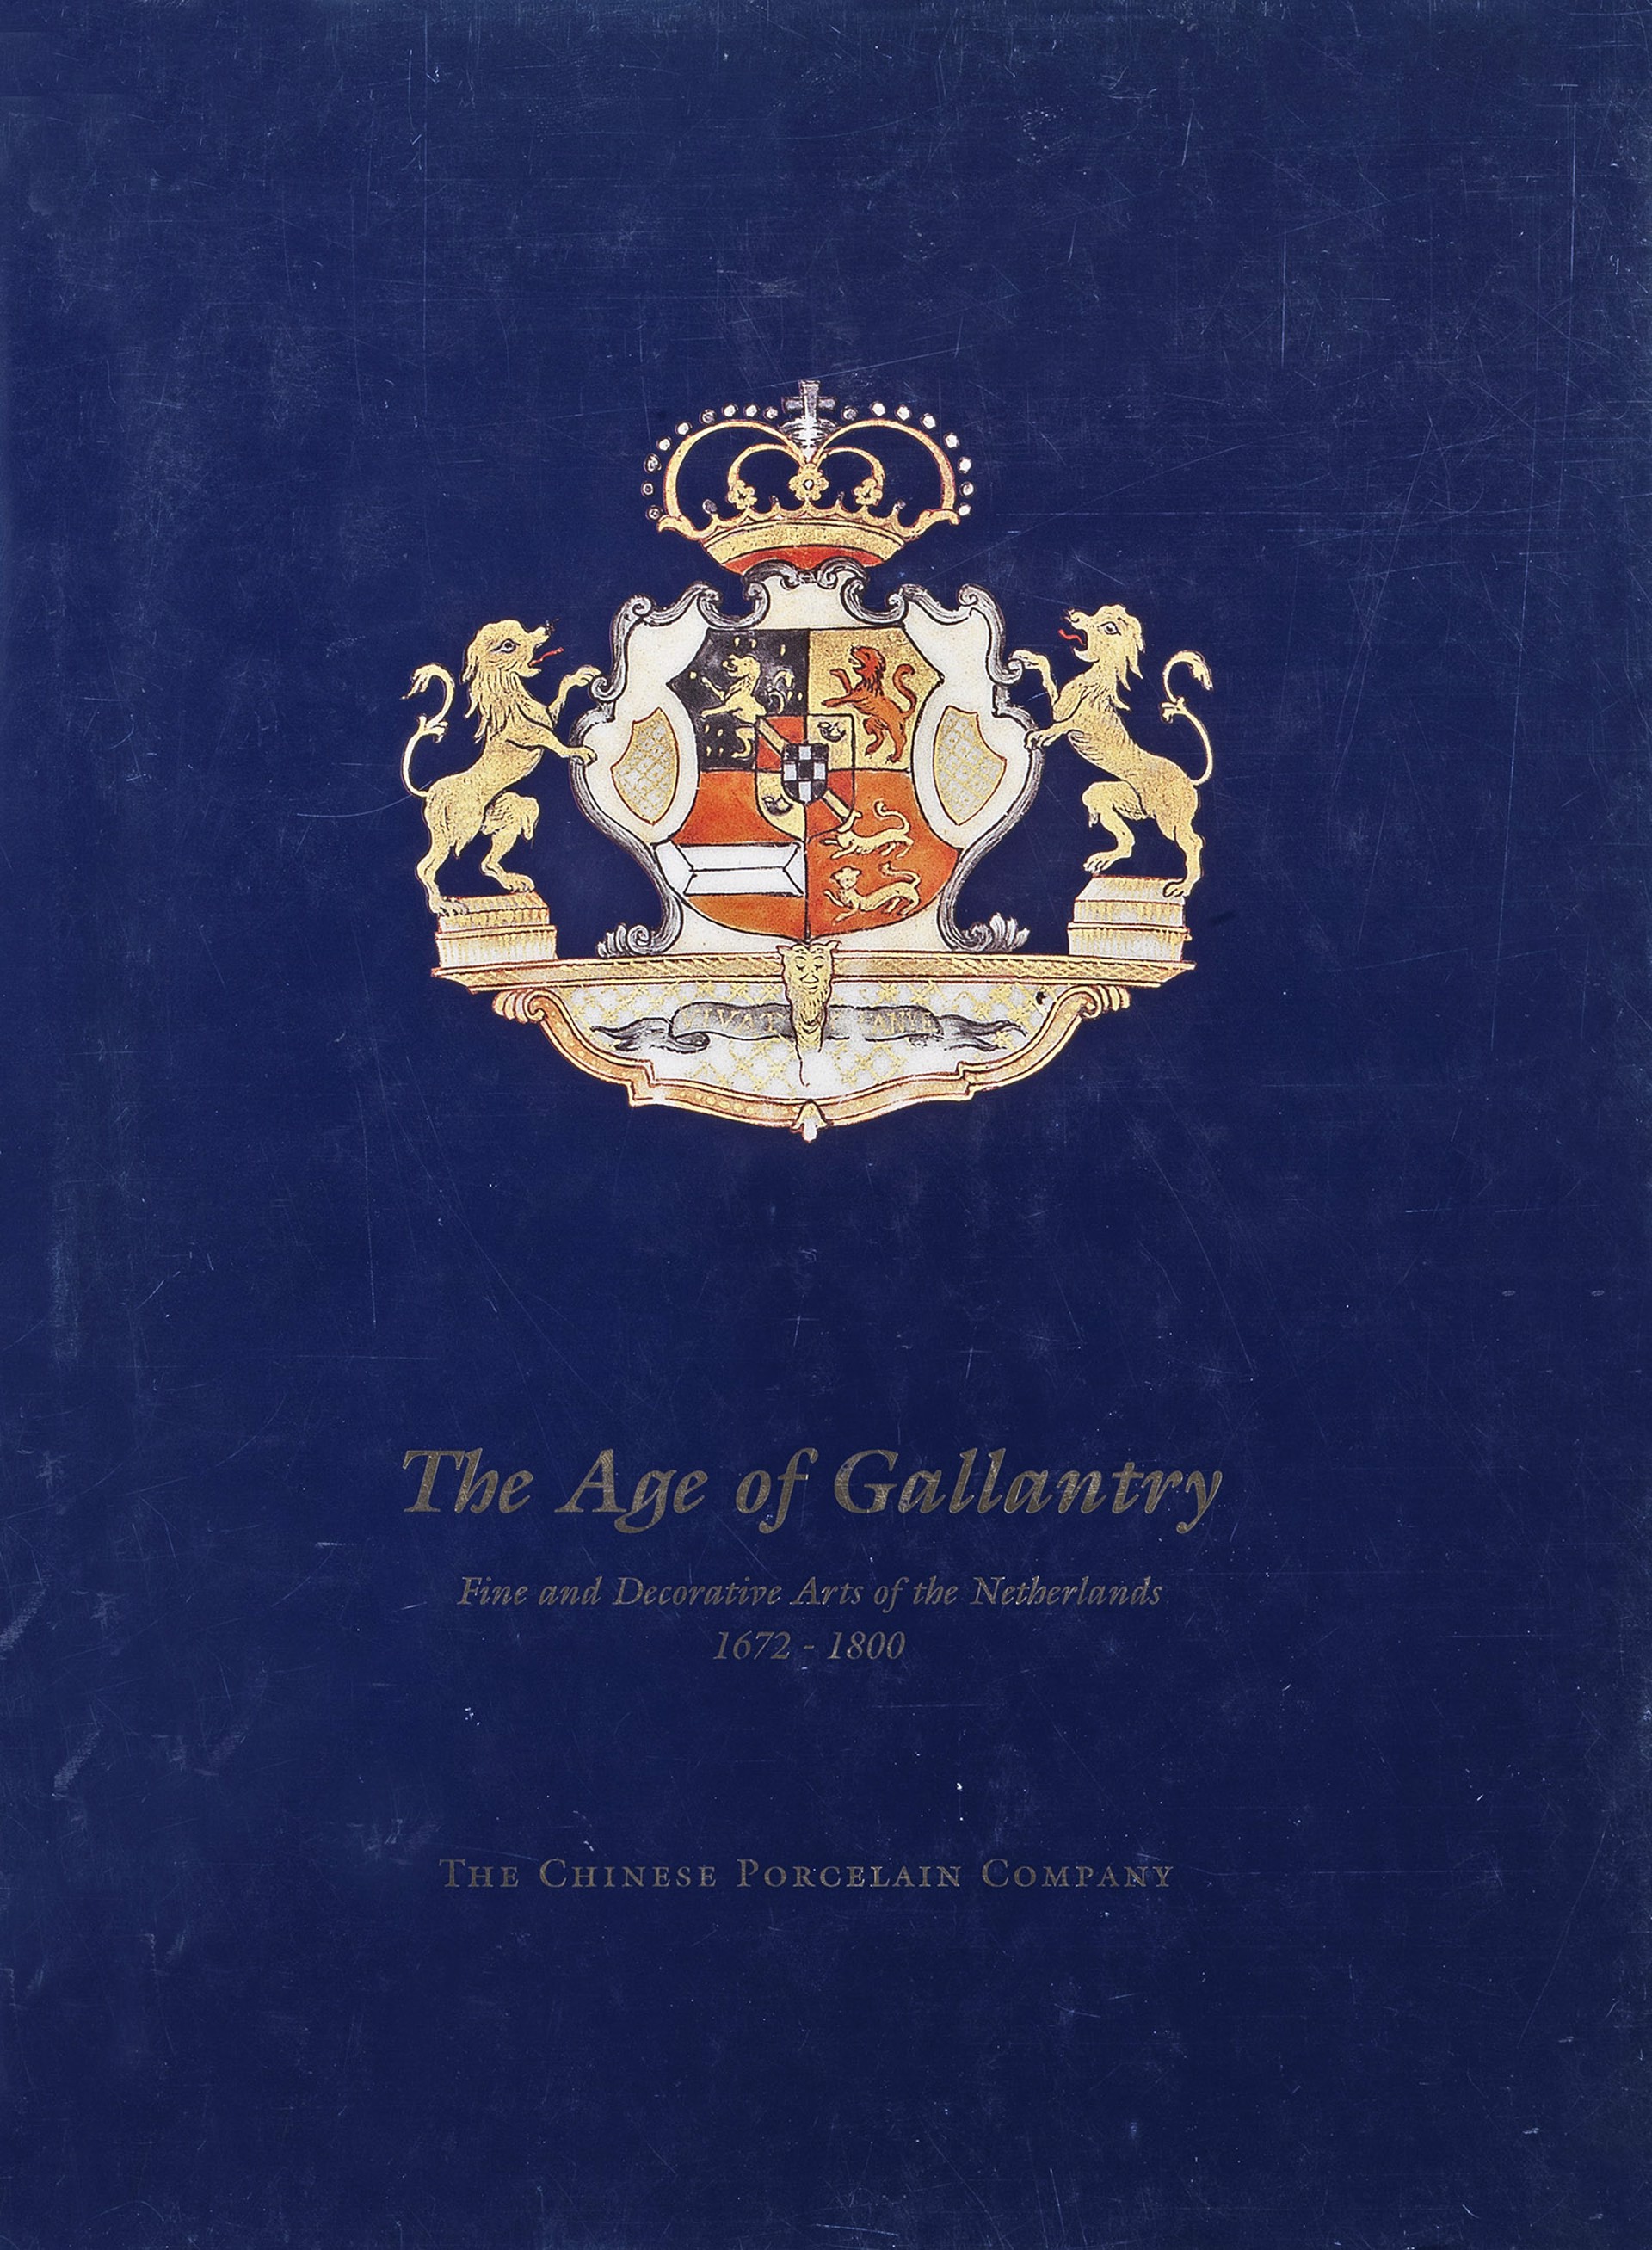 The Age of Gallantry: Fine and Decorative Arts of the Netherlands, 1672-1800 by Catalog 17